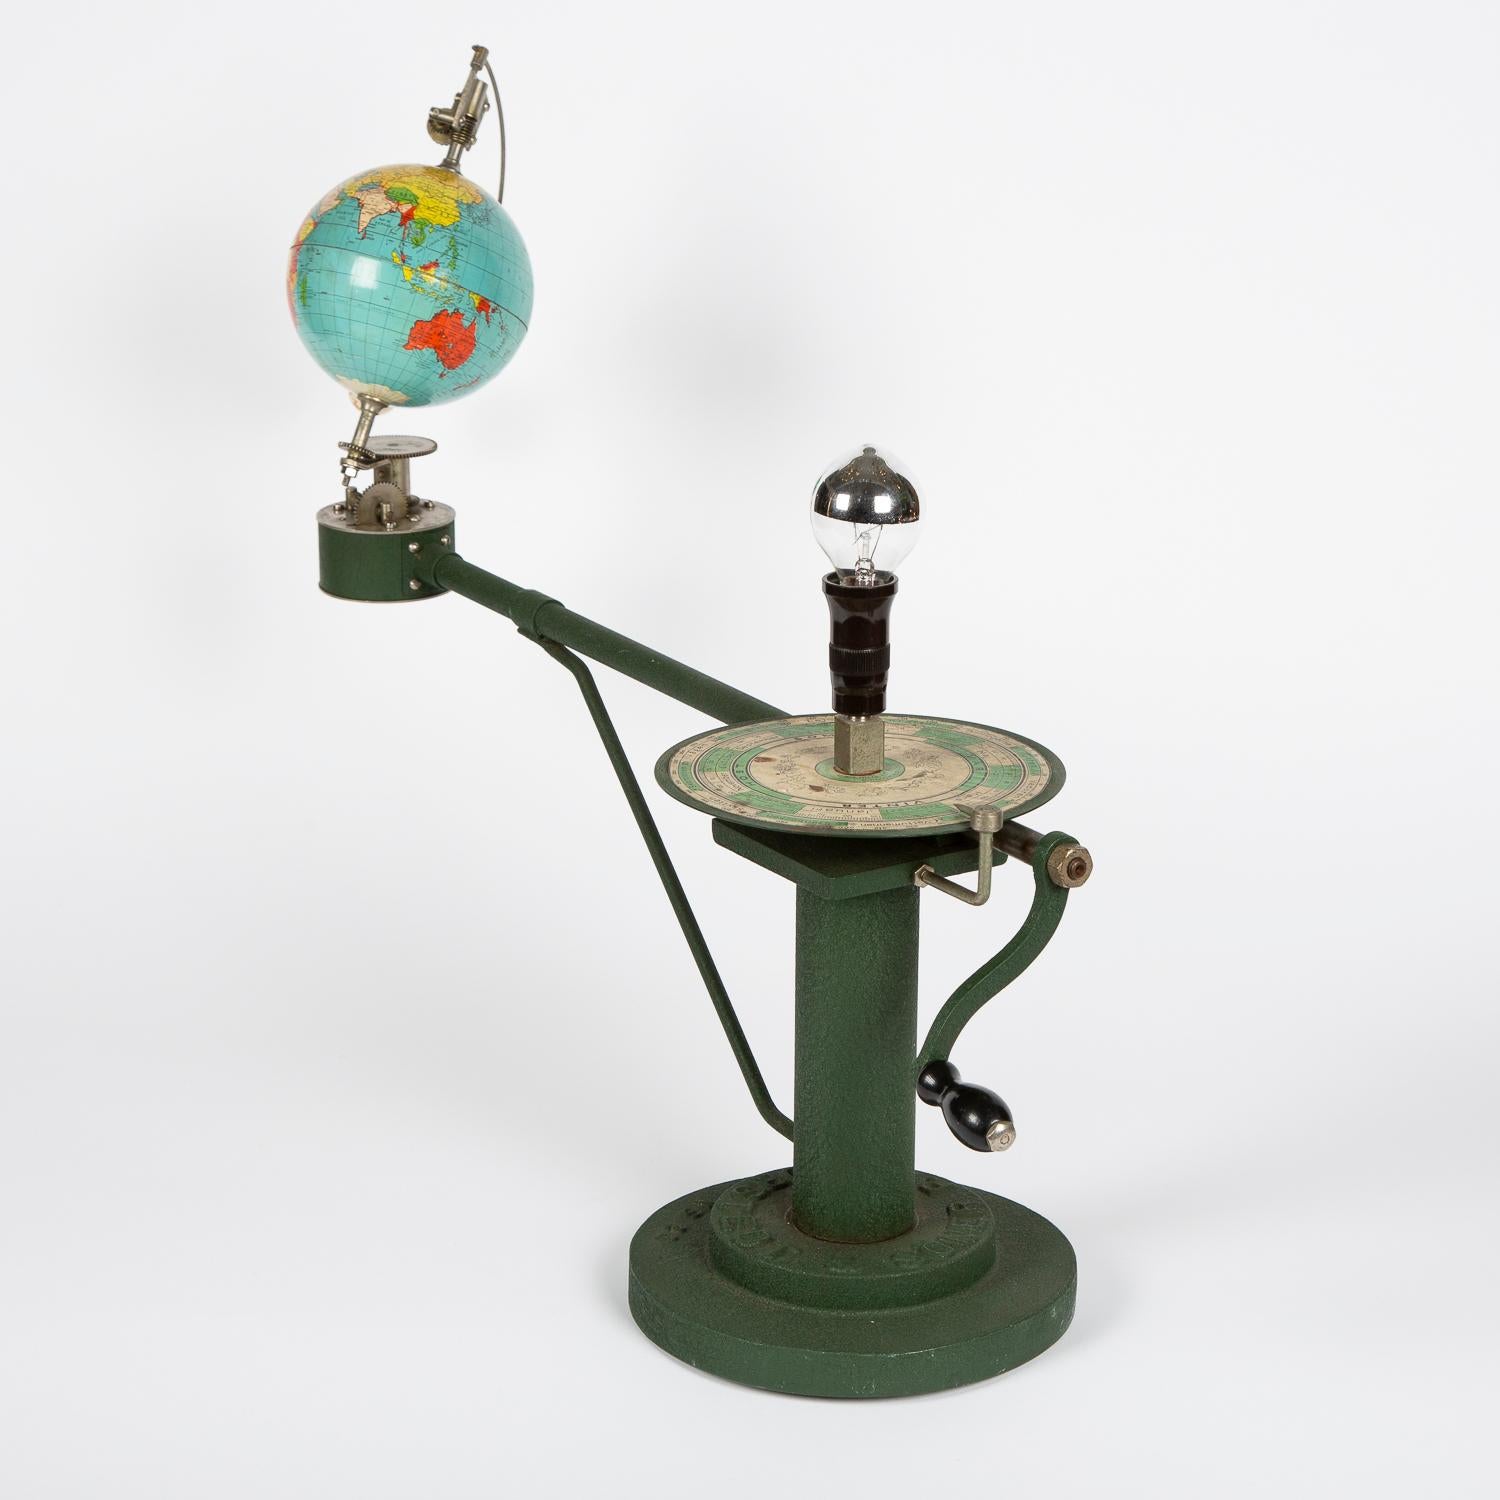 A 1930s tellurium by P. A. Norstedt & Söner of Stockholm, Sweden.

The tellurium has a hand-cranked mechanism with a globe of the Earth and Moon revolving around a central light representing the sun, the light is above circular disc printed with